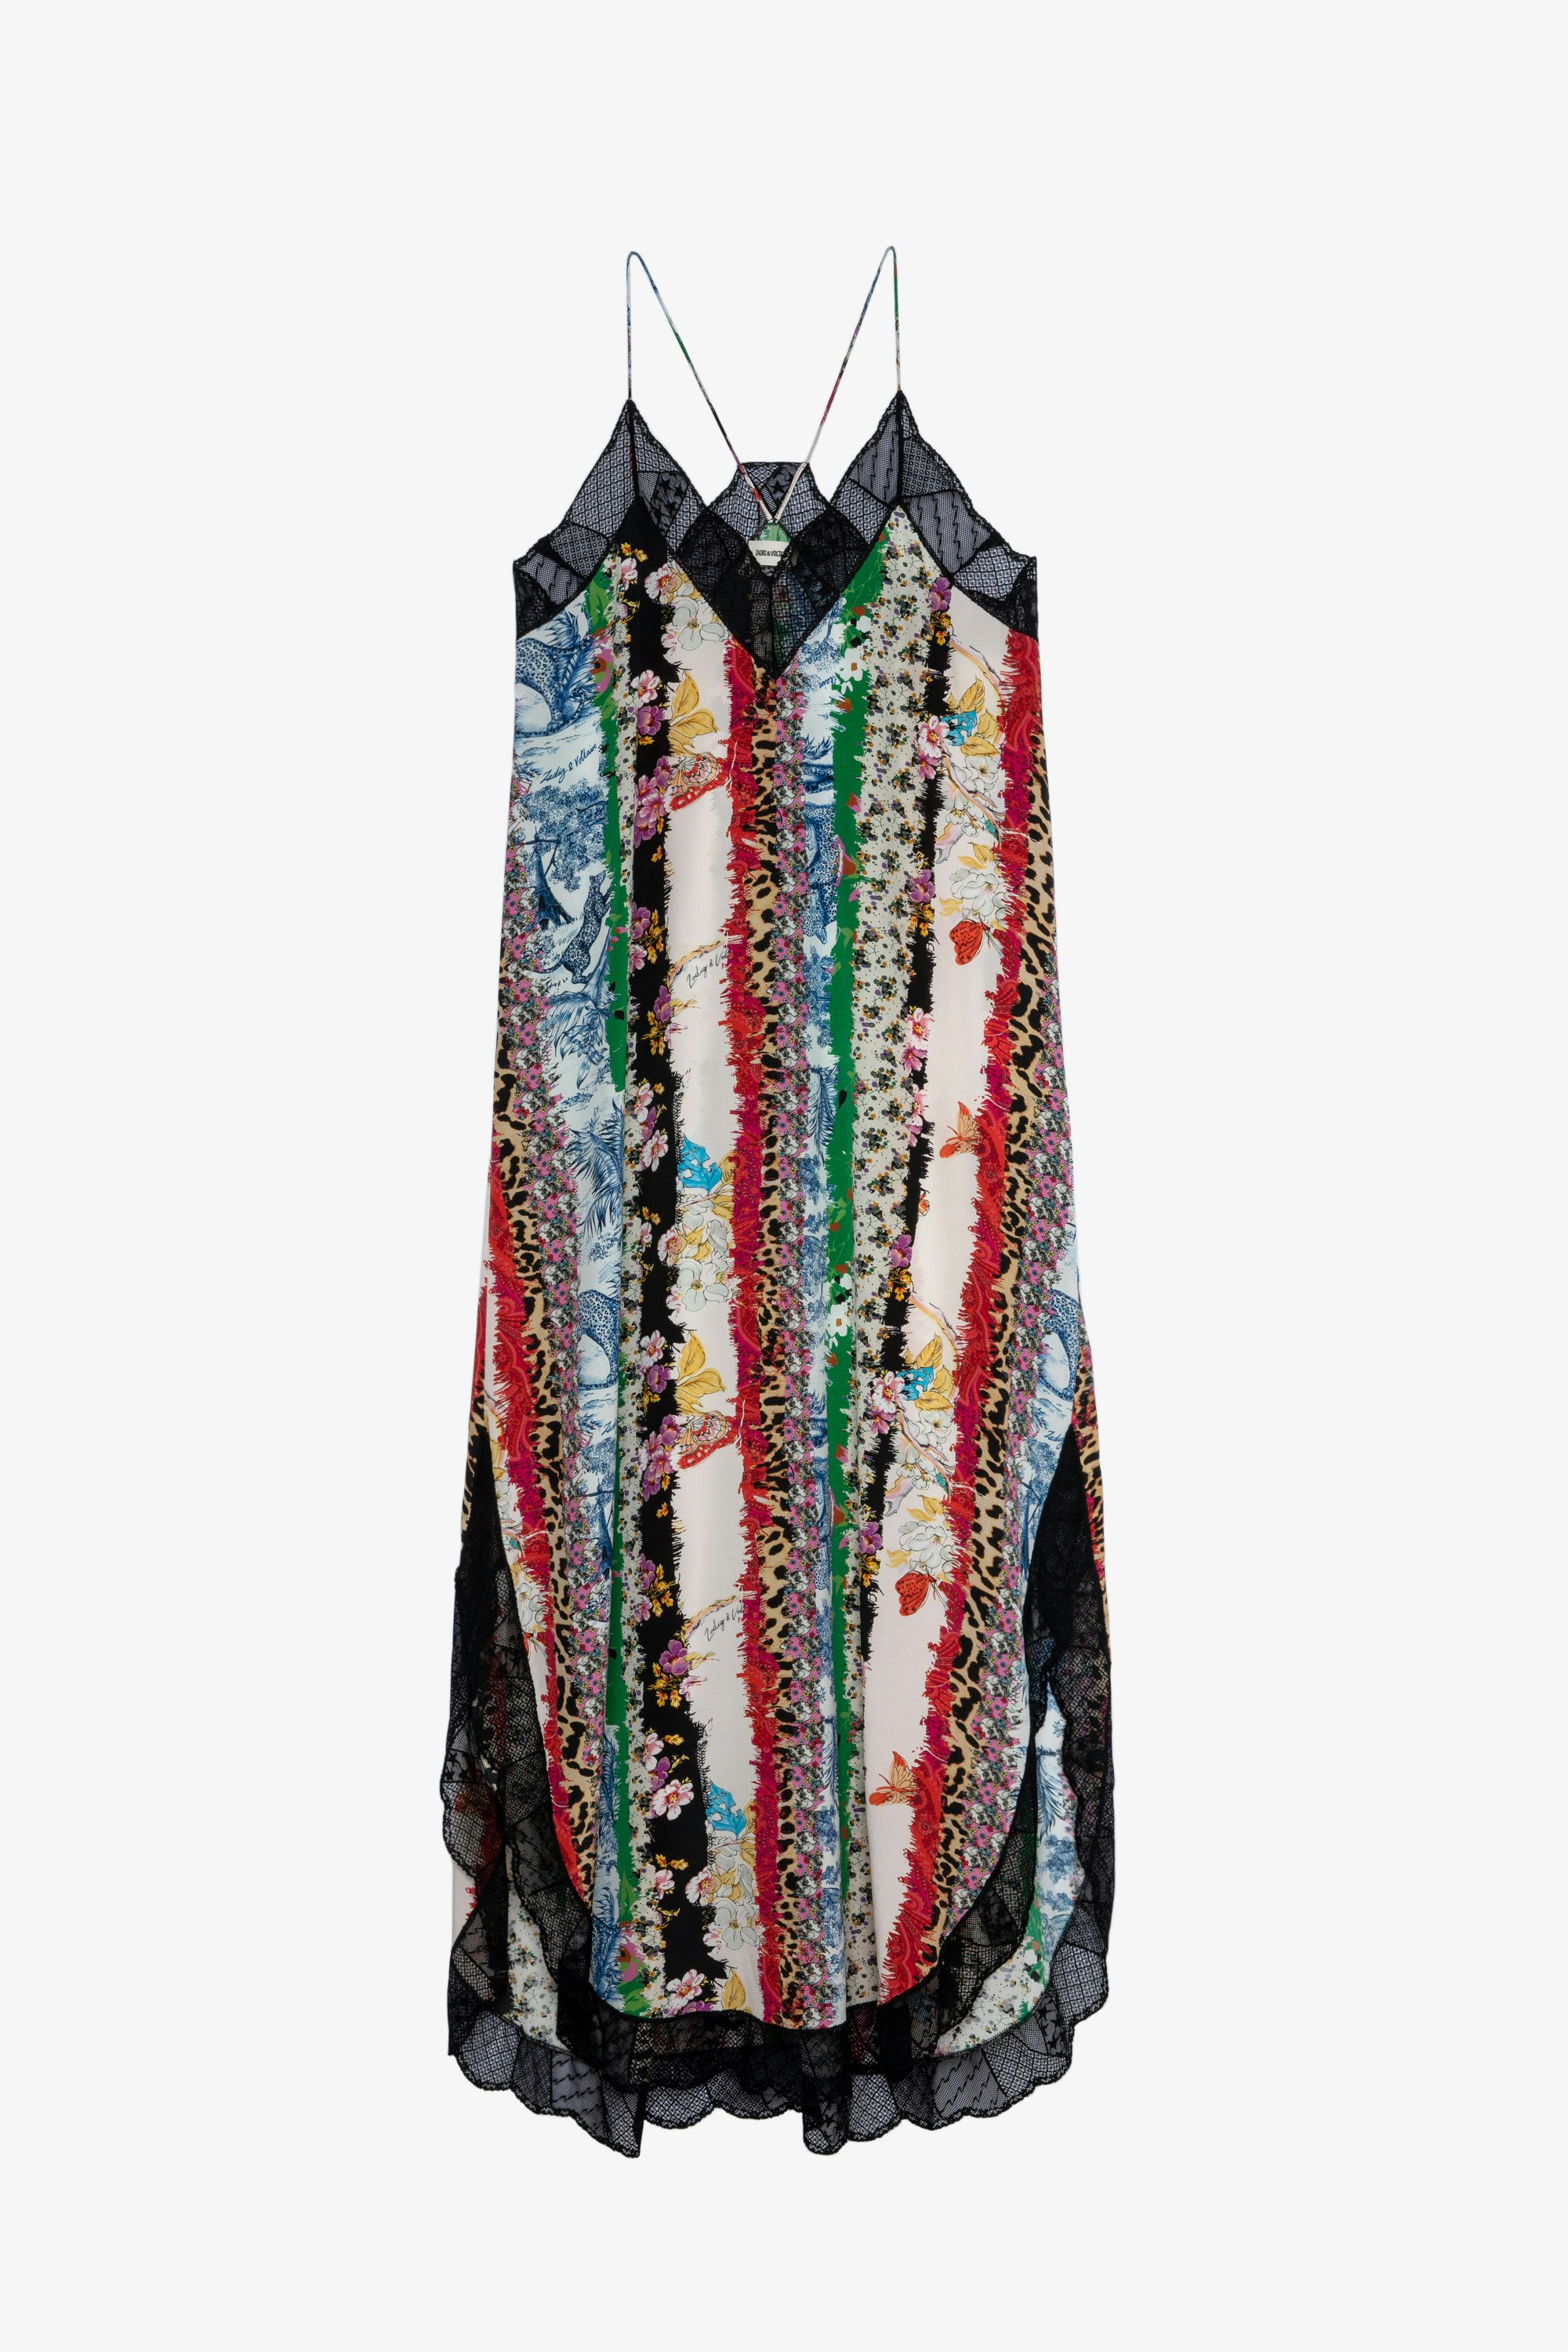 Mixed Print Ristyl ドレス Women’s long dress with thin straps and prints